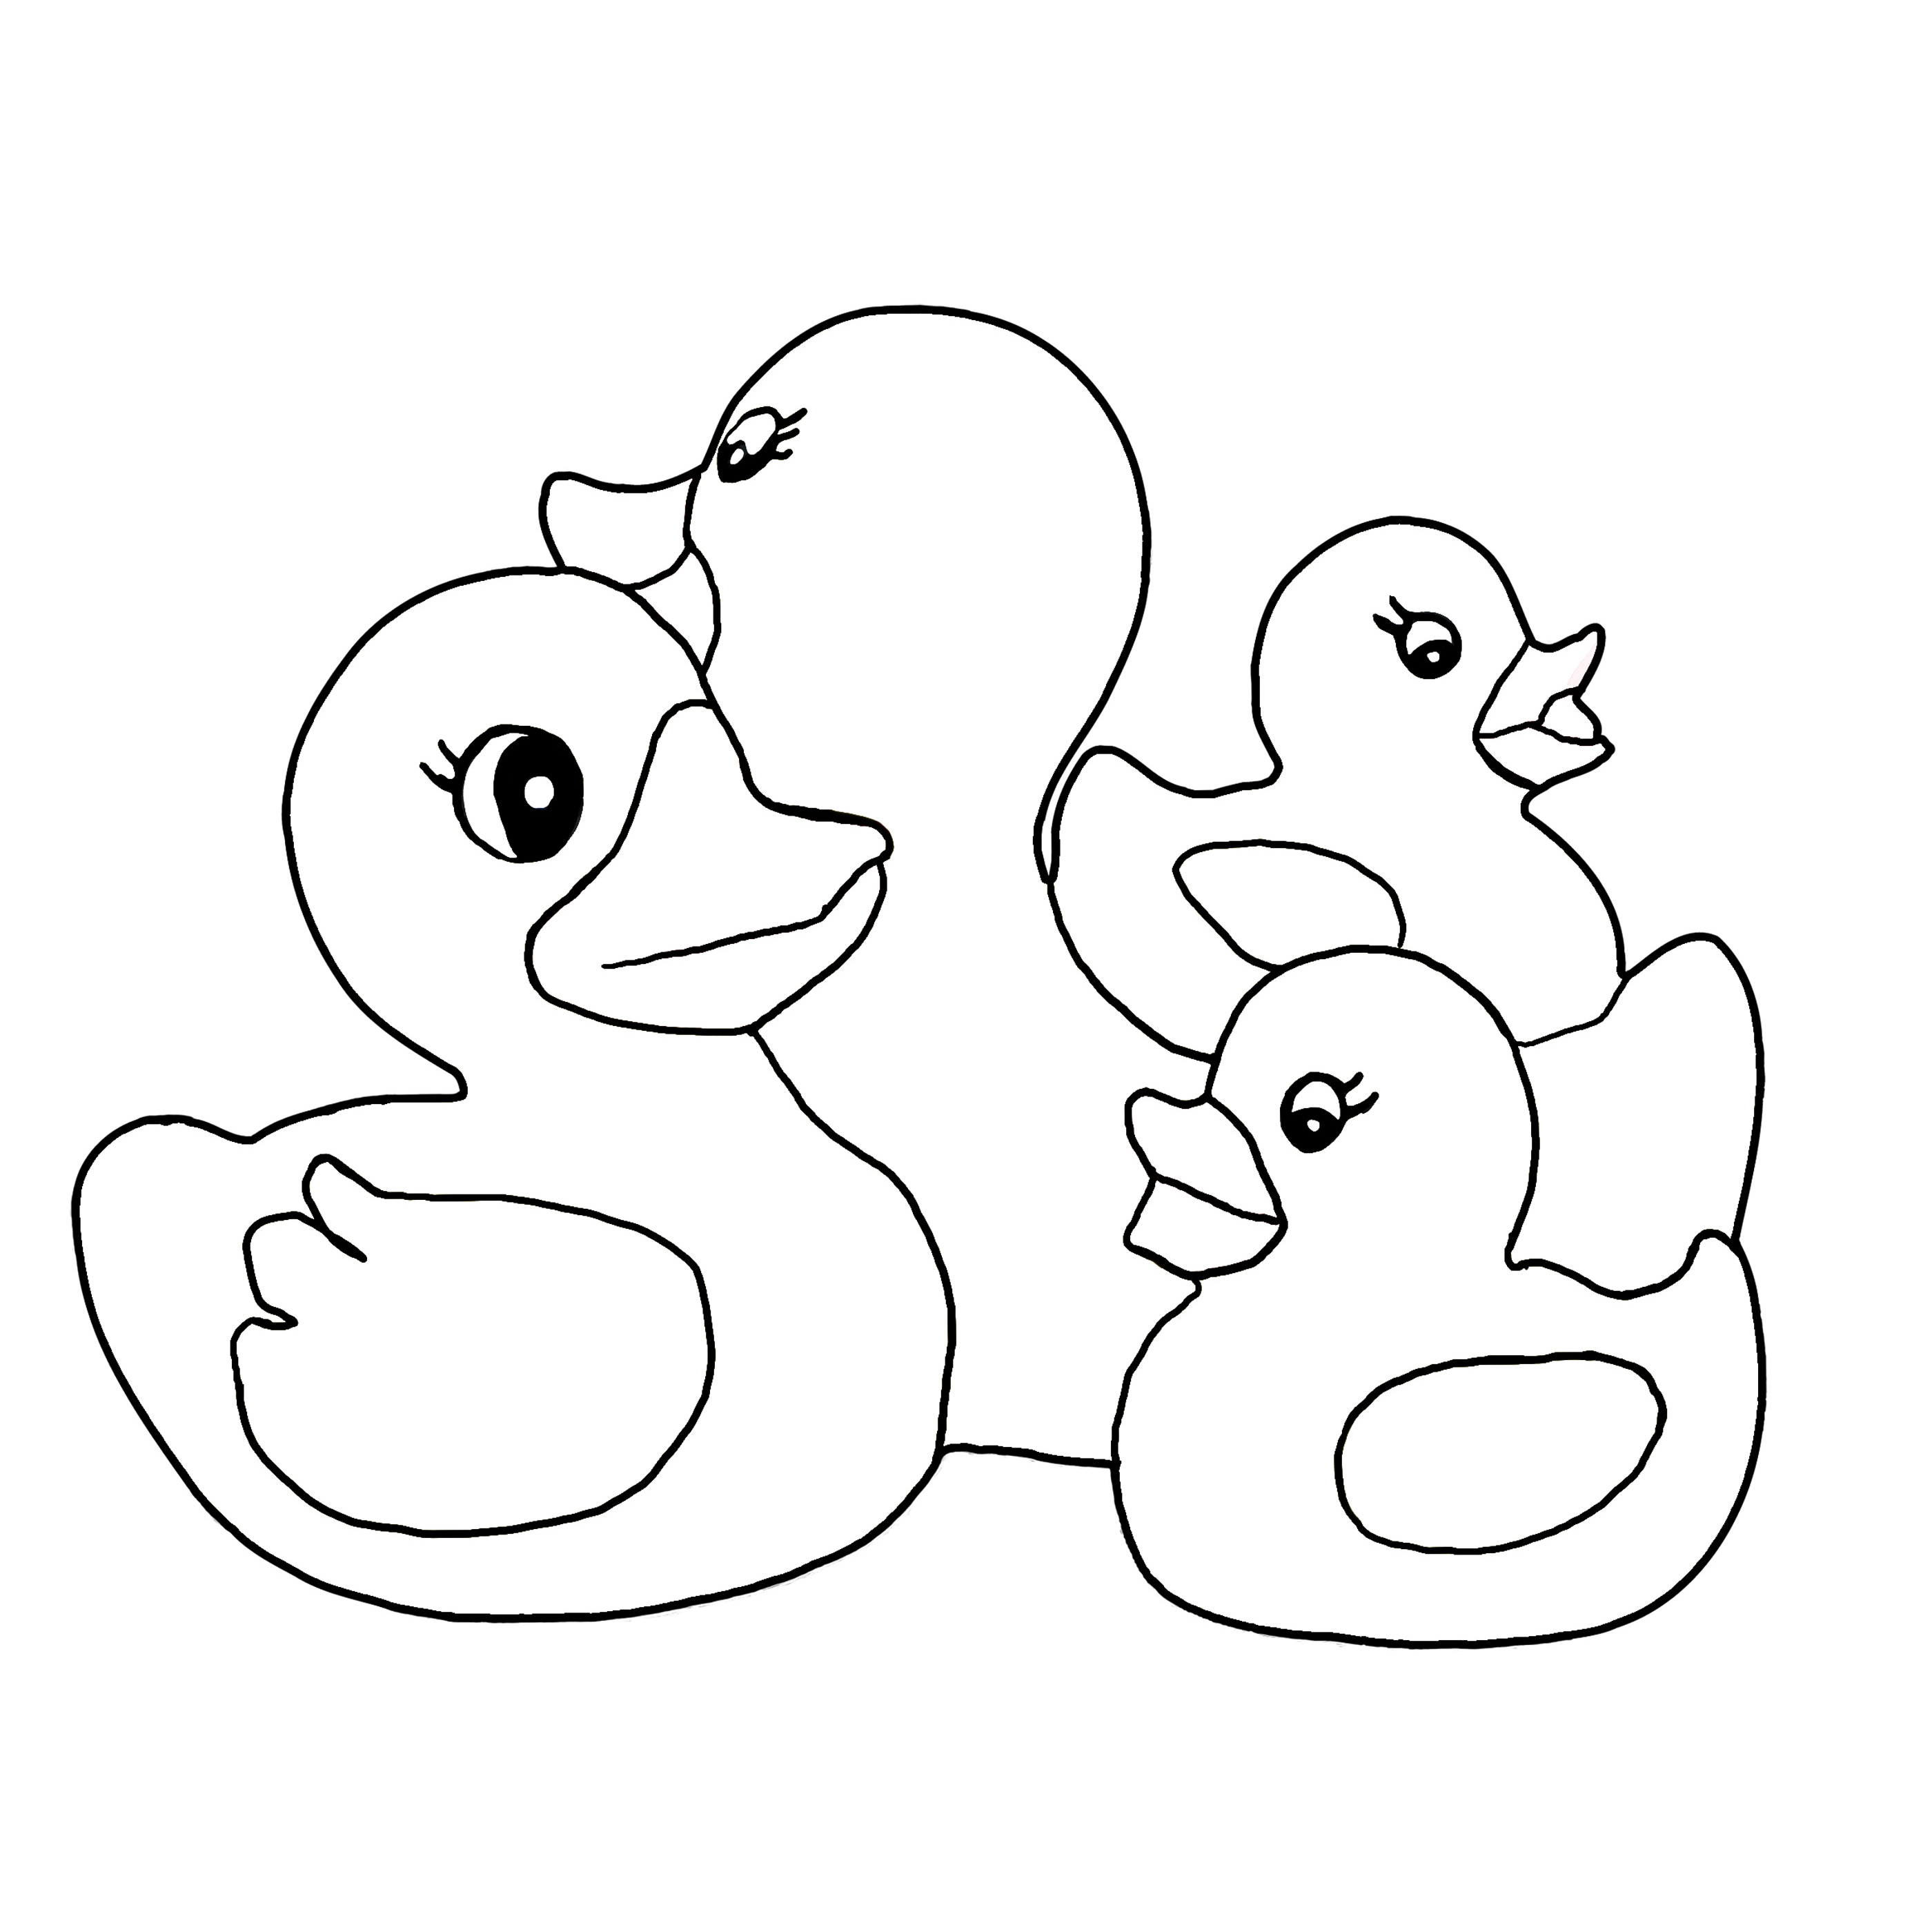 Free printable duck coloring pages for kids